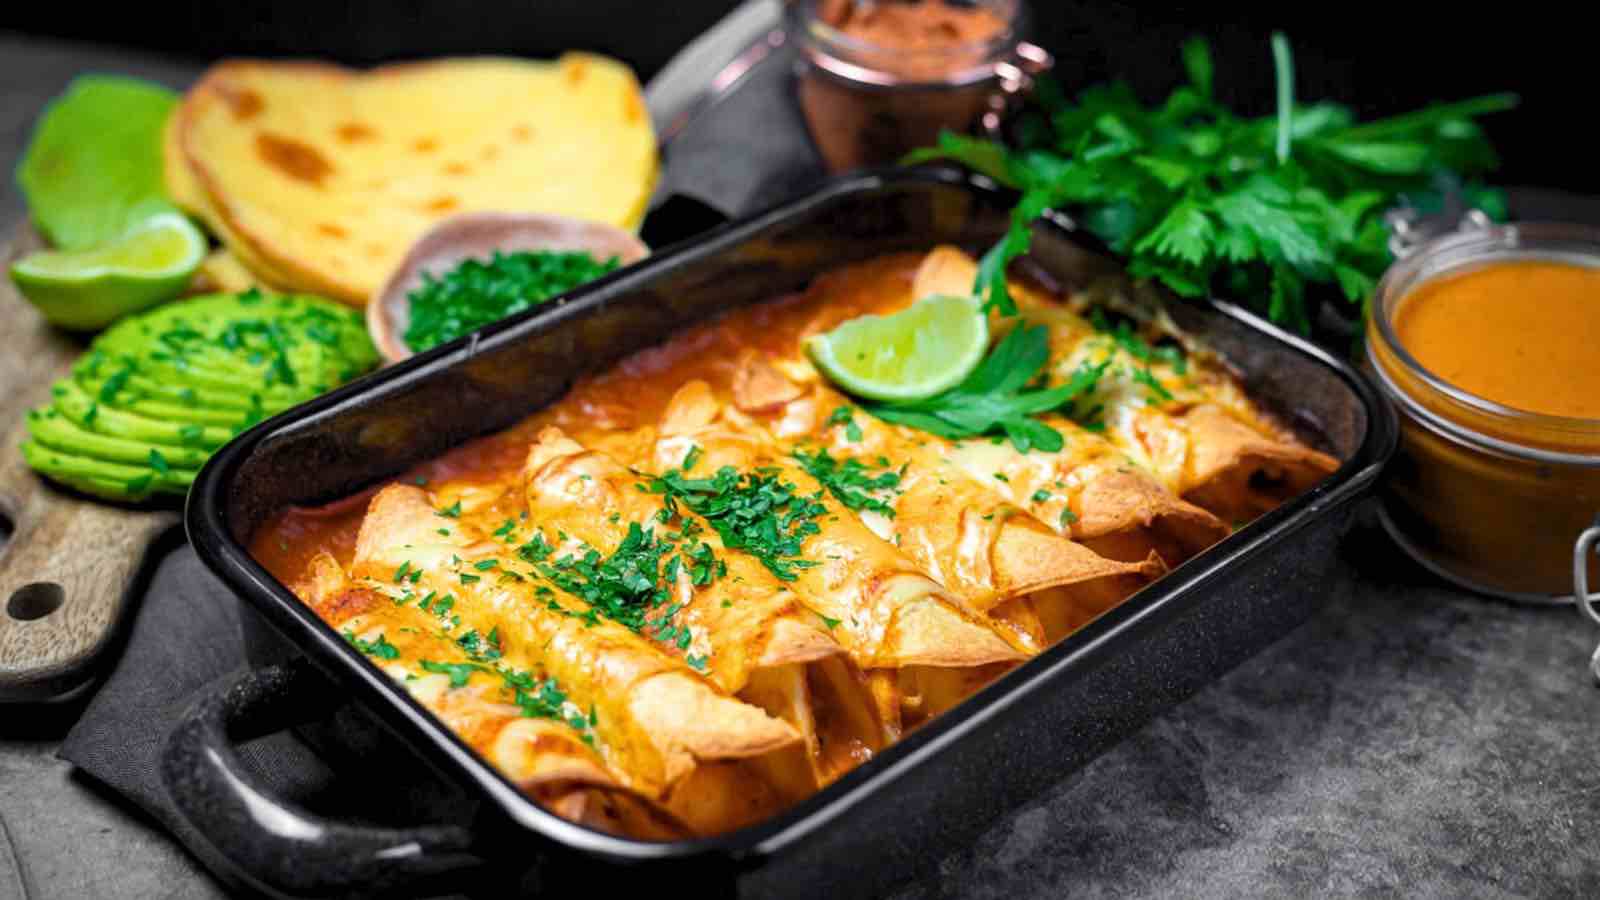 <p>Whether you’re gluten-free or just looking for a delicious twist on a classic favorite, our Chicken Gluten Free Enchiladas are sure to hit the spot. Packed with tender chicken, melty cheese, and flavorful enchilada sauce, they’re a satisfying and delicious option for any meal.<br><strong>Get the Recipe: </strong><a href="https://bestcleaneating.com/gluten-free-enchiladas/?utm_source=msn&utm_medium=page&utm_campaign=msn">Chicken Gluten Free Enchiladas</a></p> <p>The post <a href="https://www.lowcarb-nocarb.com/comfort-recipes-to-crush-takeout/">23 Comfort Recipes to Crush Takeout</a> appeared first on <a href="https://www.lowcarb-nocarb.com">Low Carb No Carb</a>.</p>